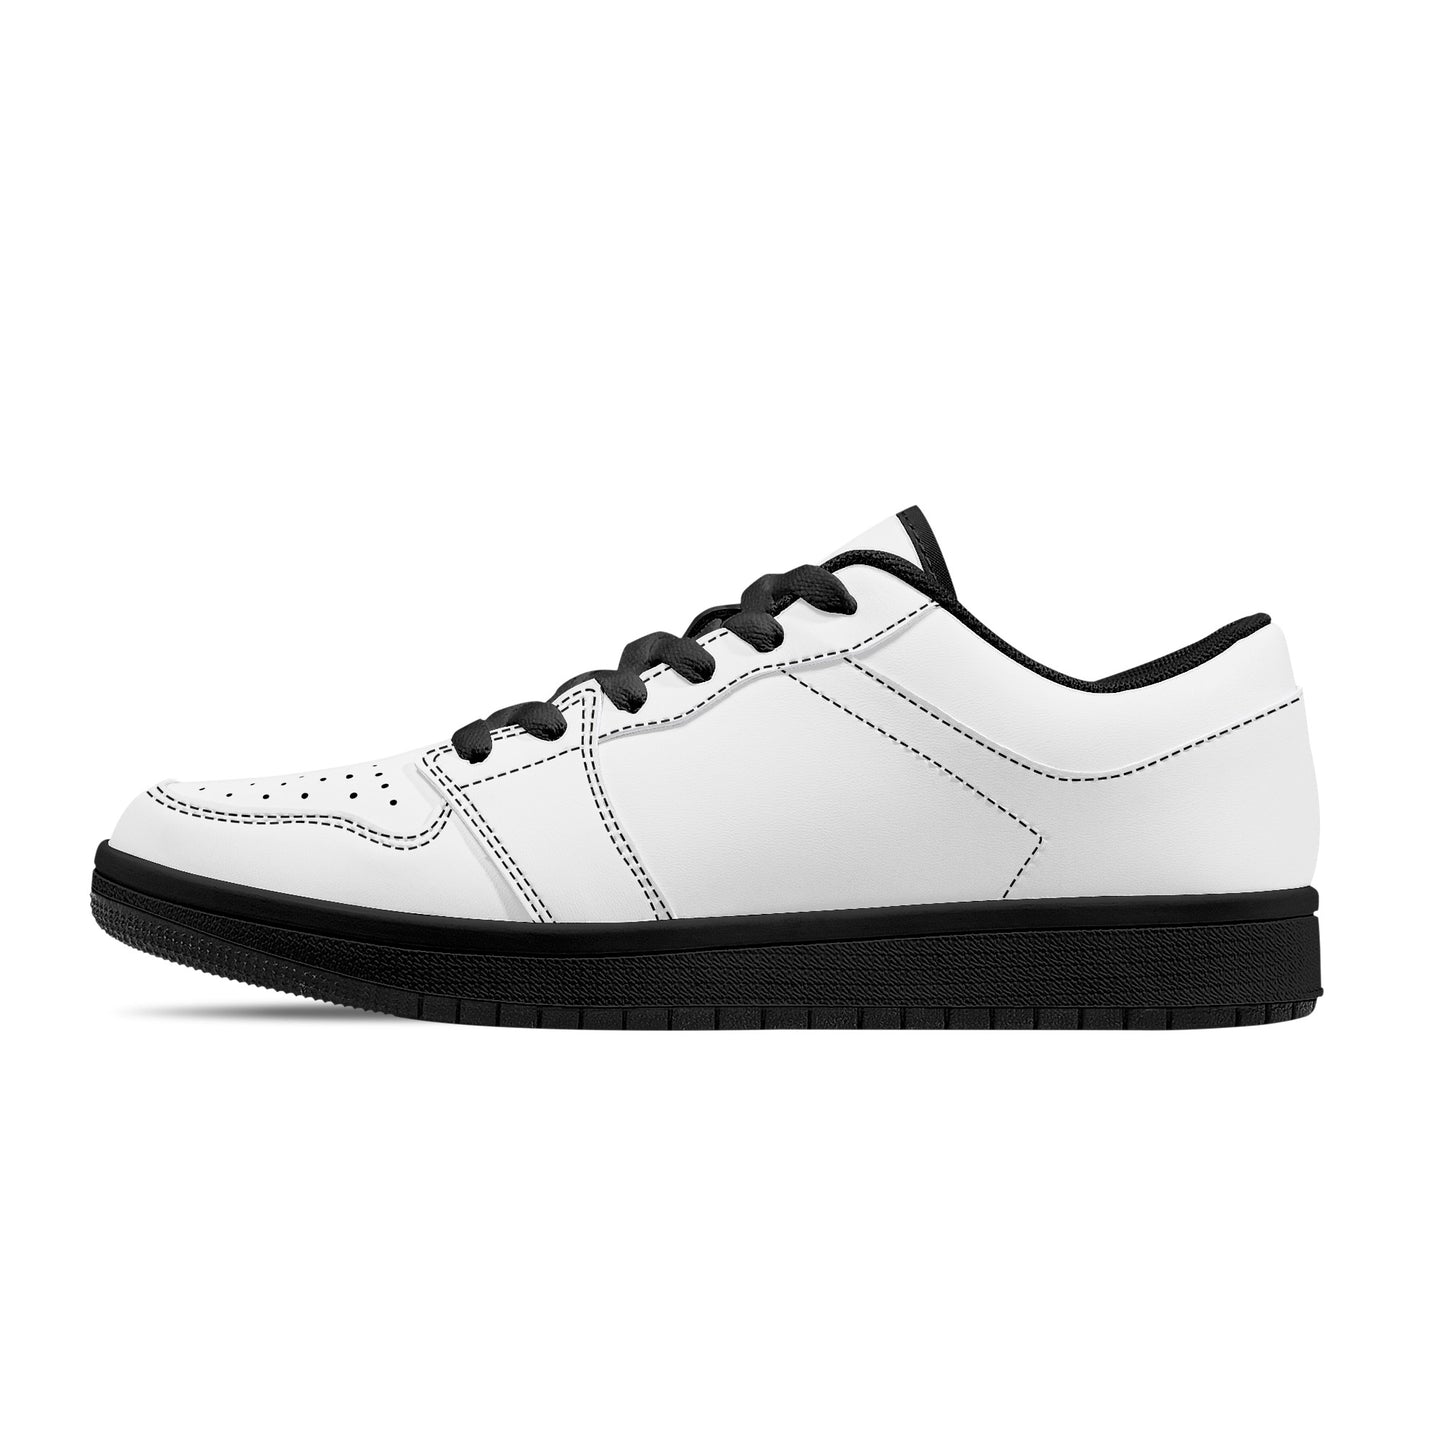 Create Your Own - Black Sole Low-Top Leather Sneakers